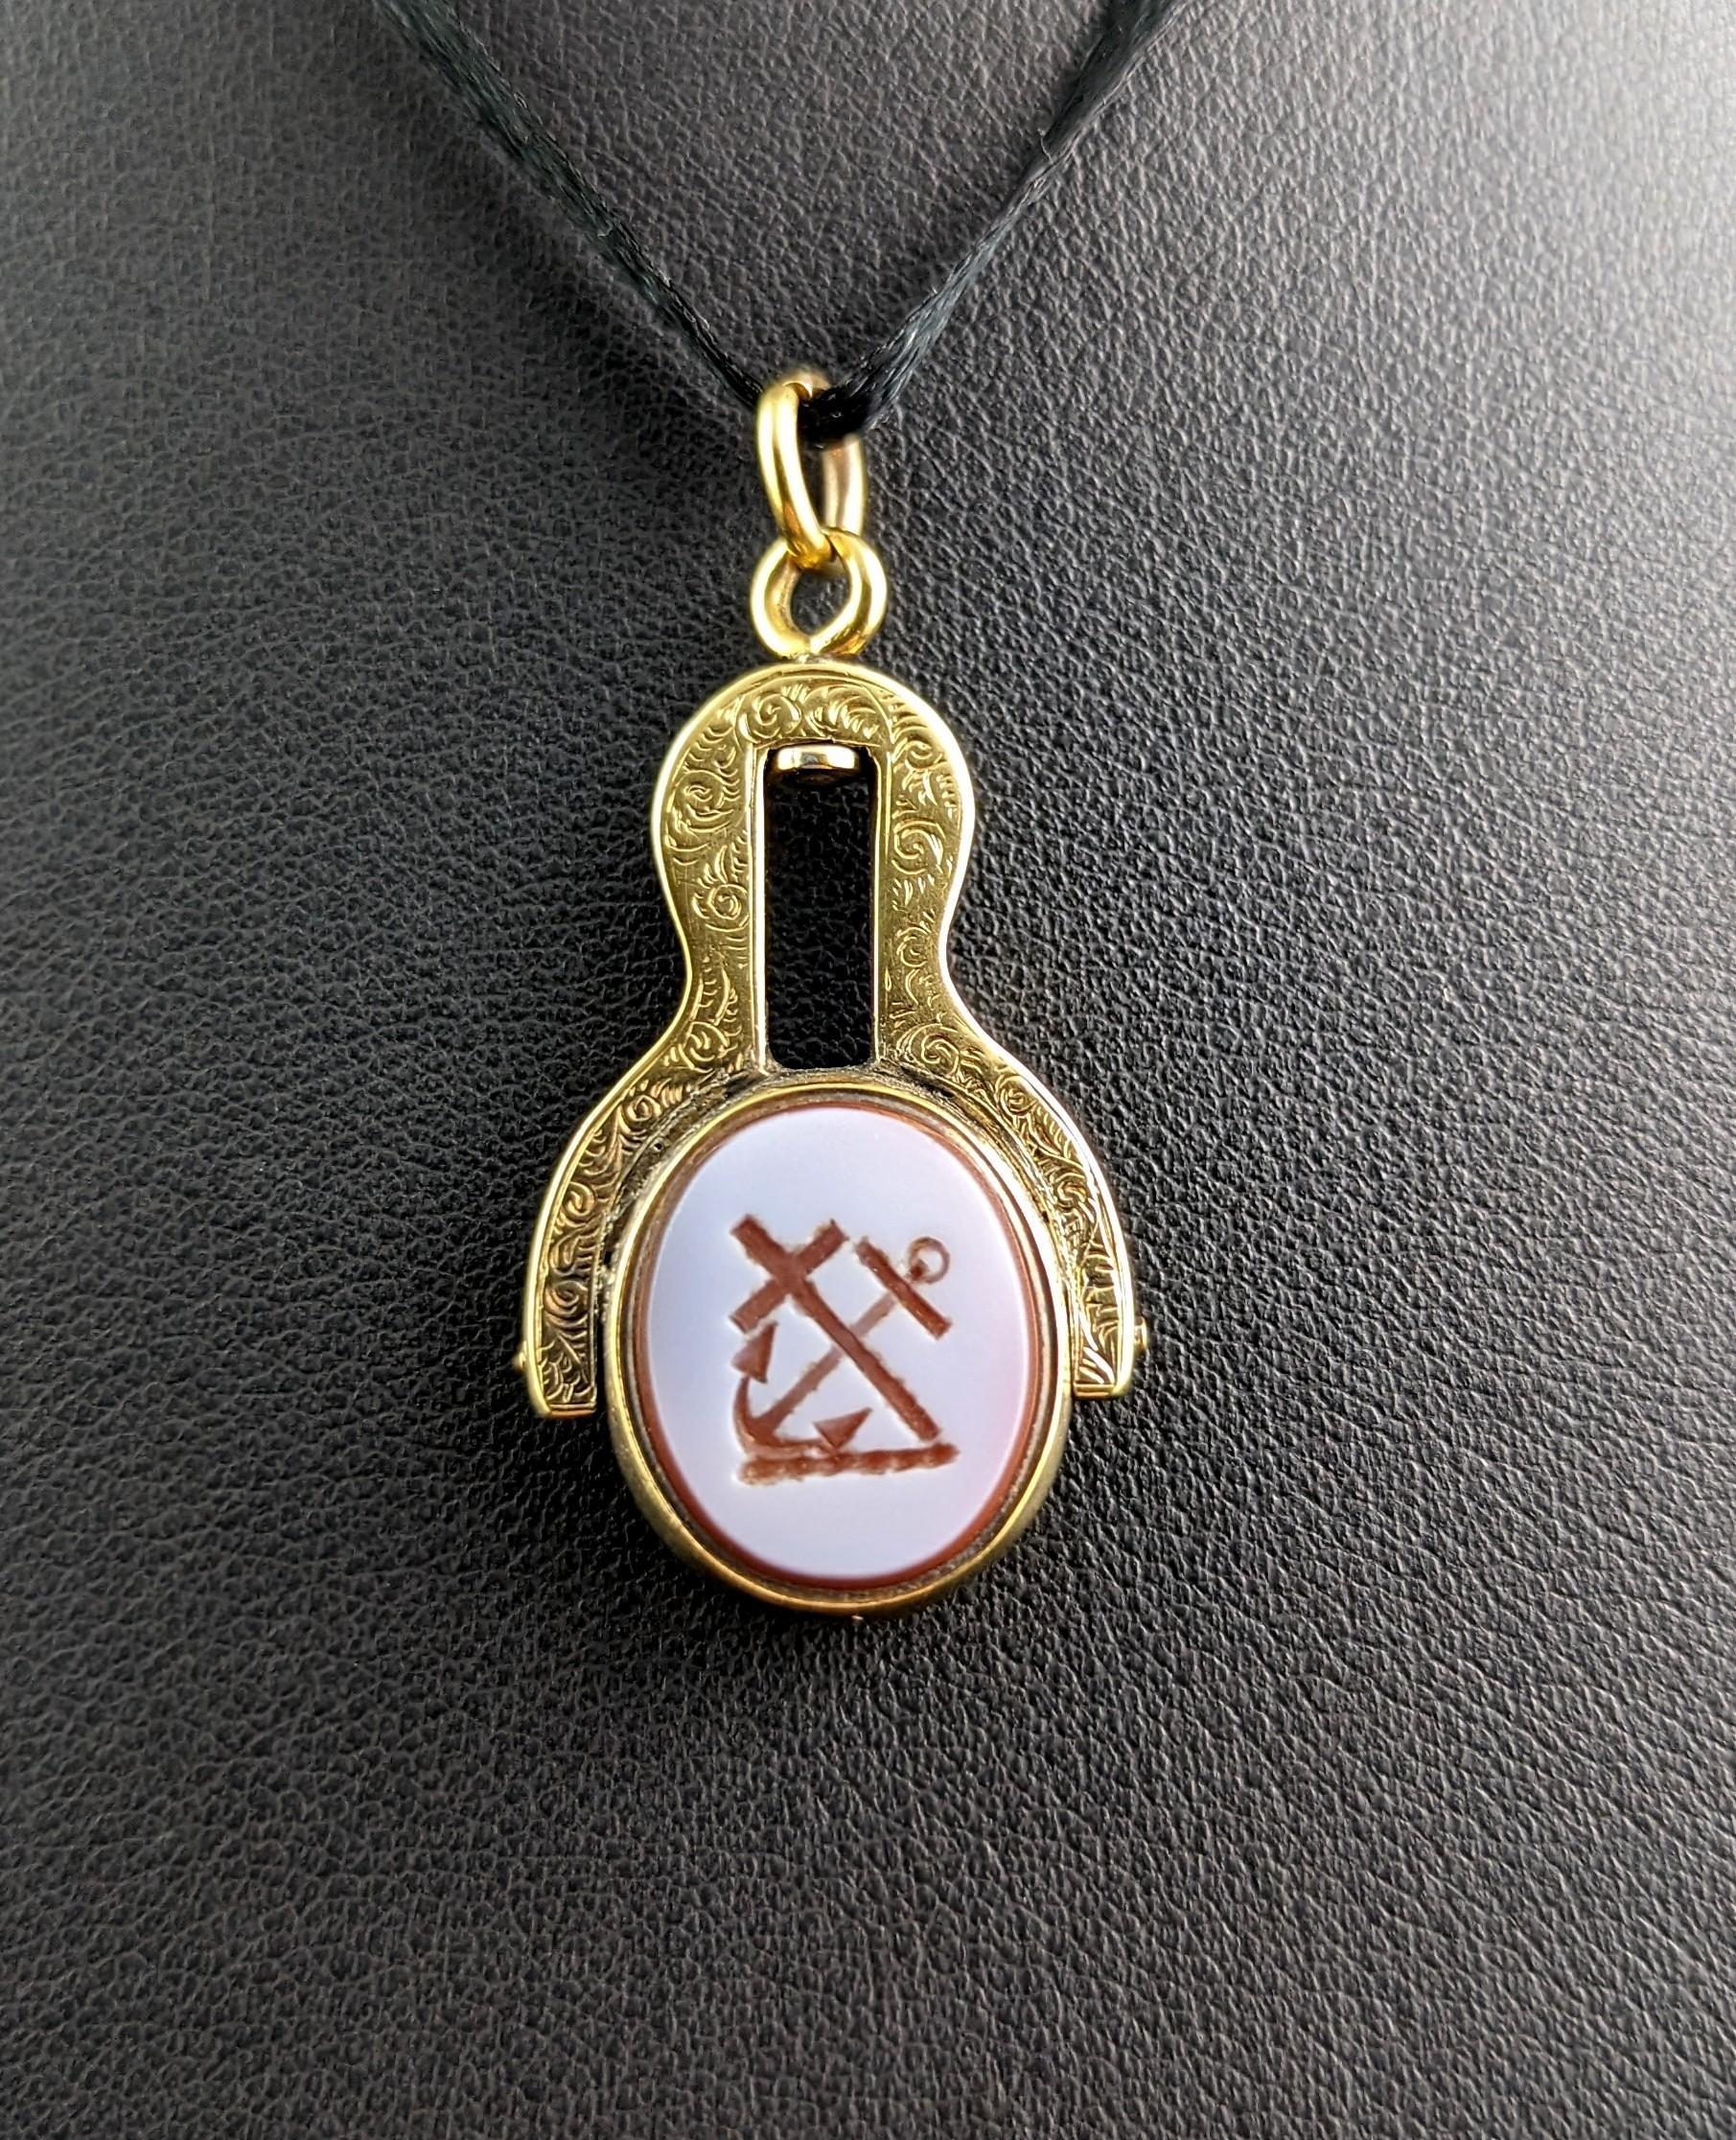 This antique Victorian 9ct gold seal fob makes for a fantastic pendant or the perfect addition to your favourite Albert chain.

The fob is crafted in rich 9ct yellow gold with fine engraved detailing and features a bloodstone to one side and a